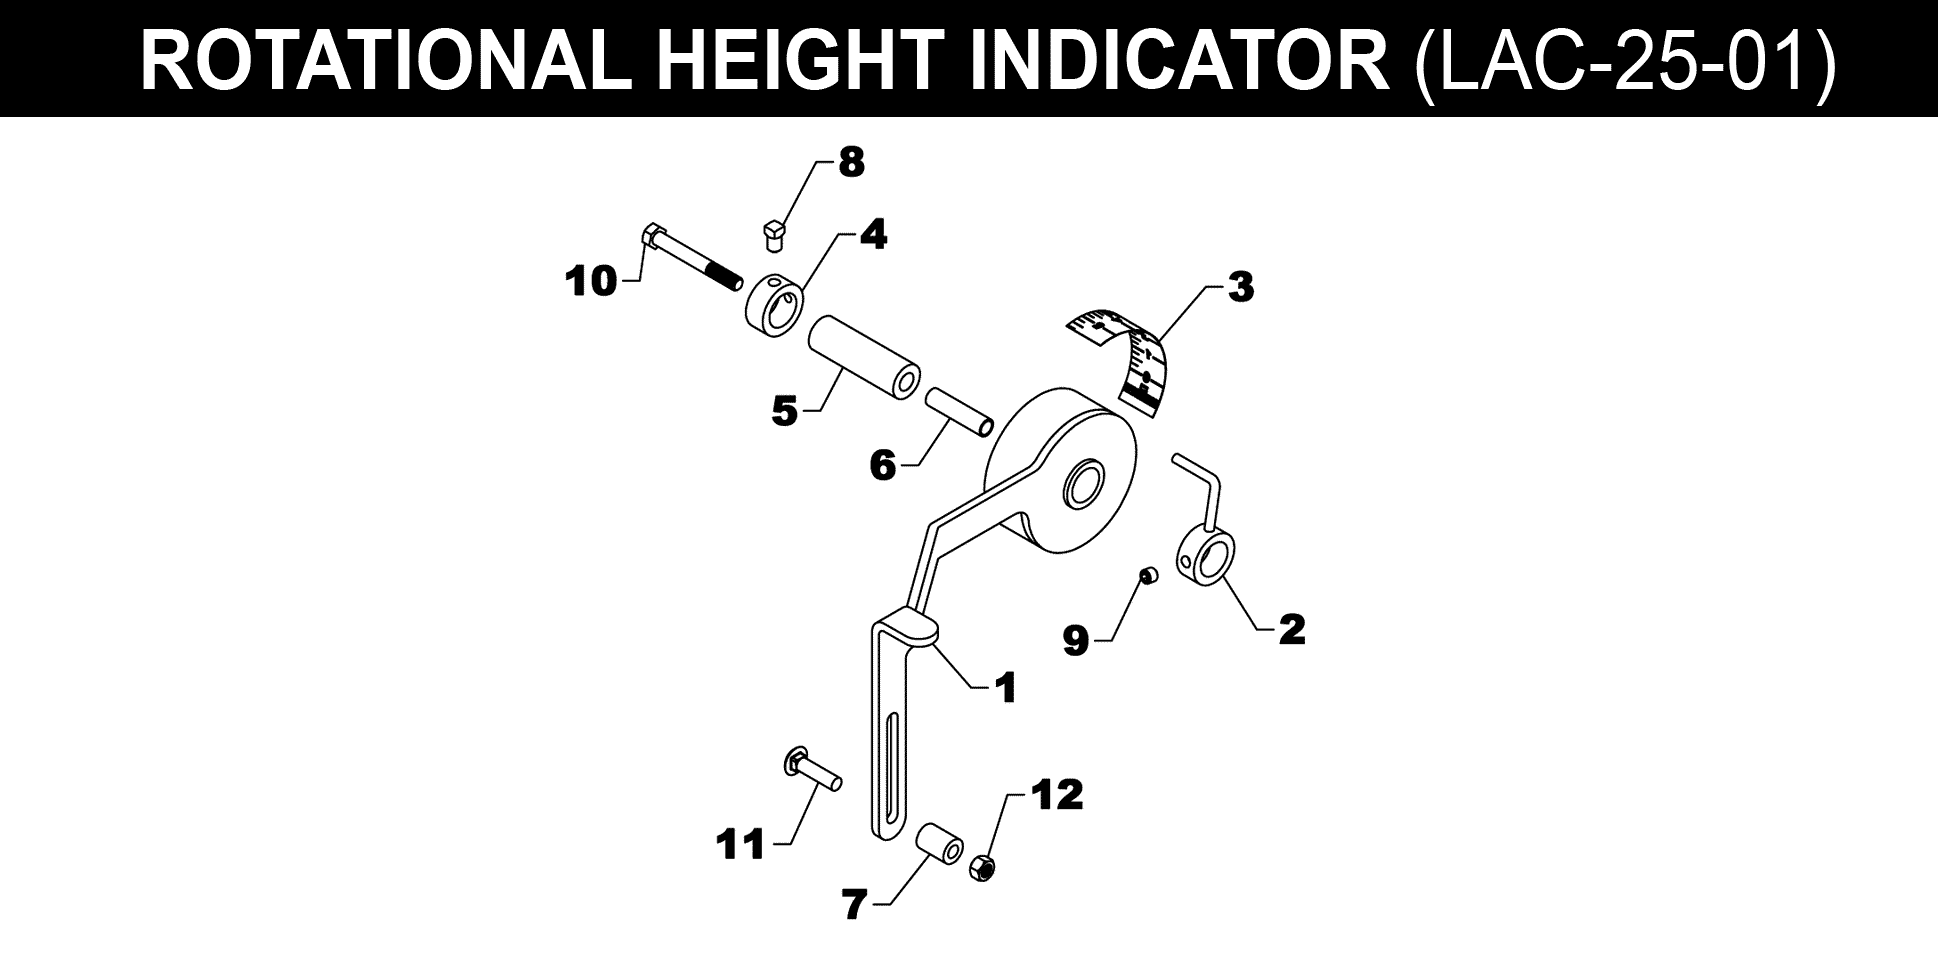 Height Indicator - LAC-25-01